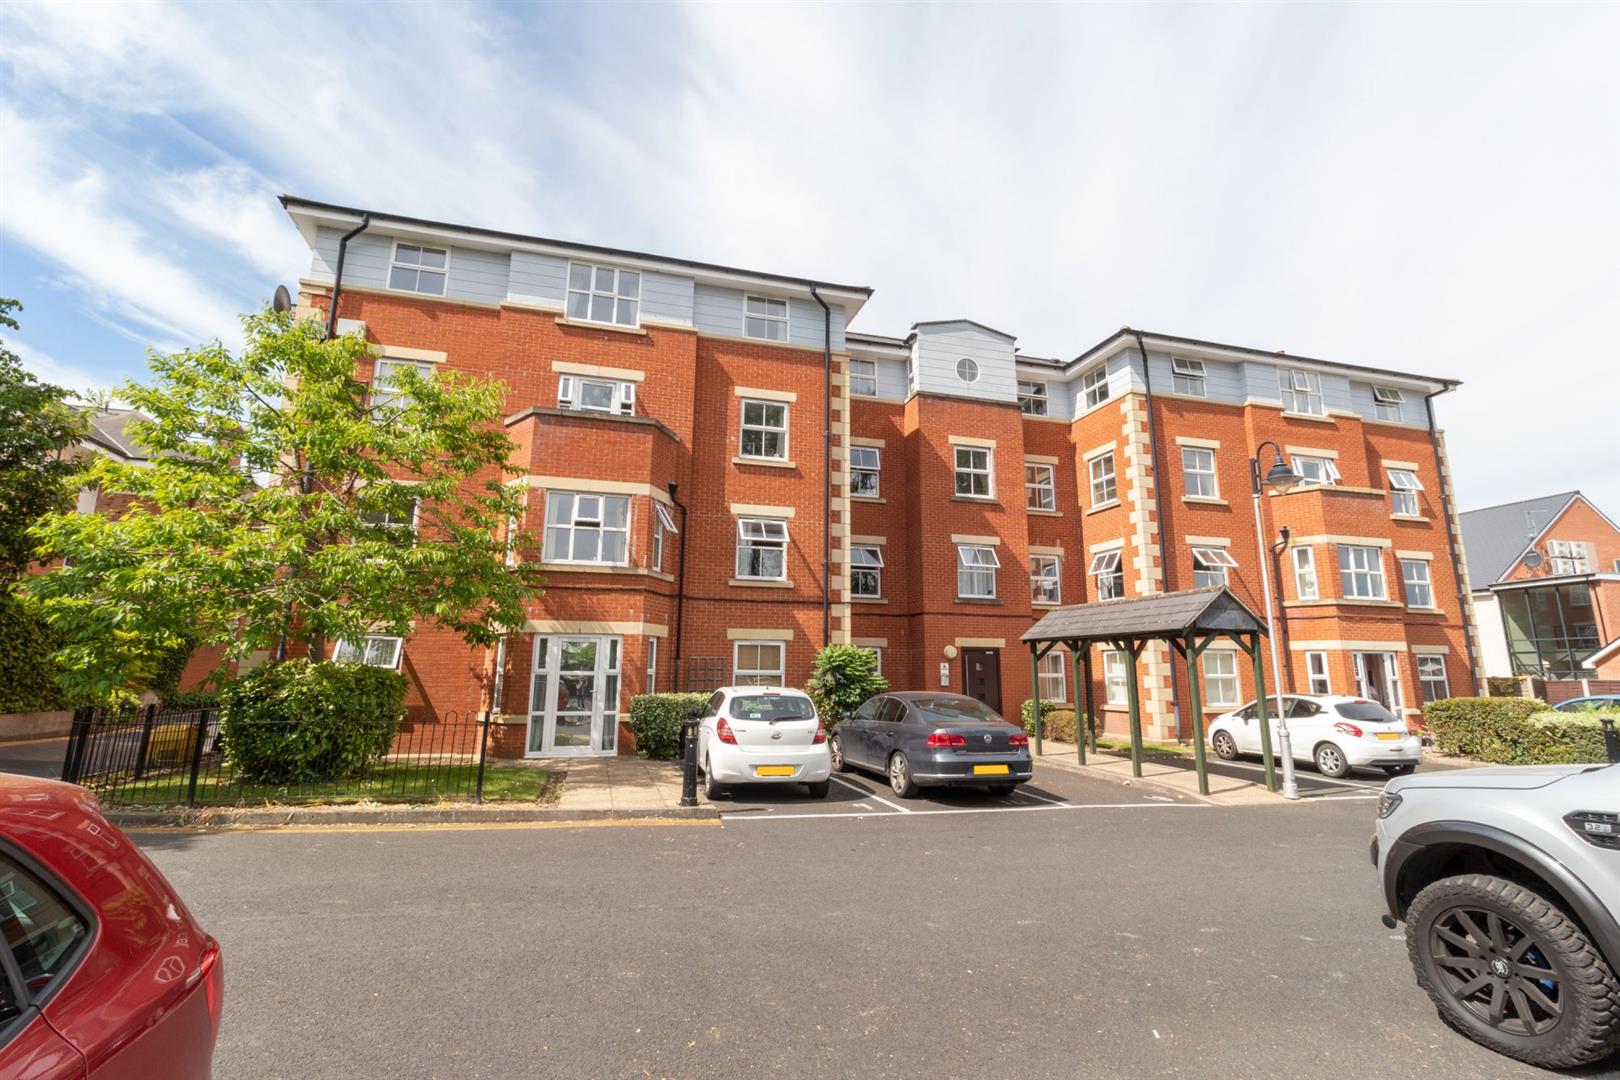 2 bed  for sale in Warwick Road, Olton, B92 